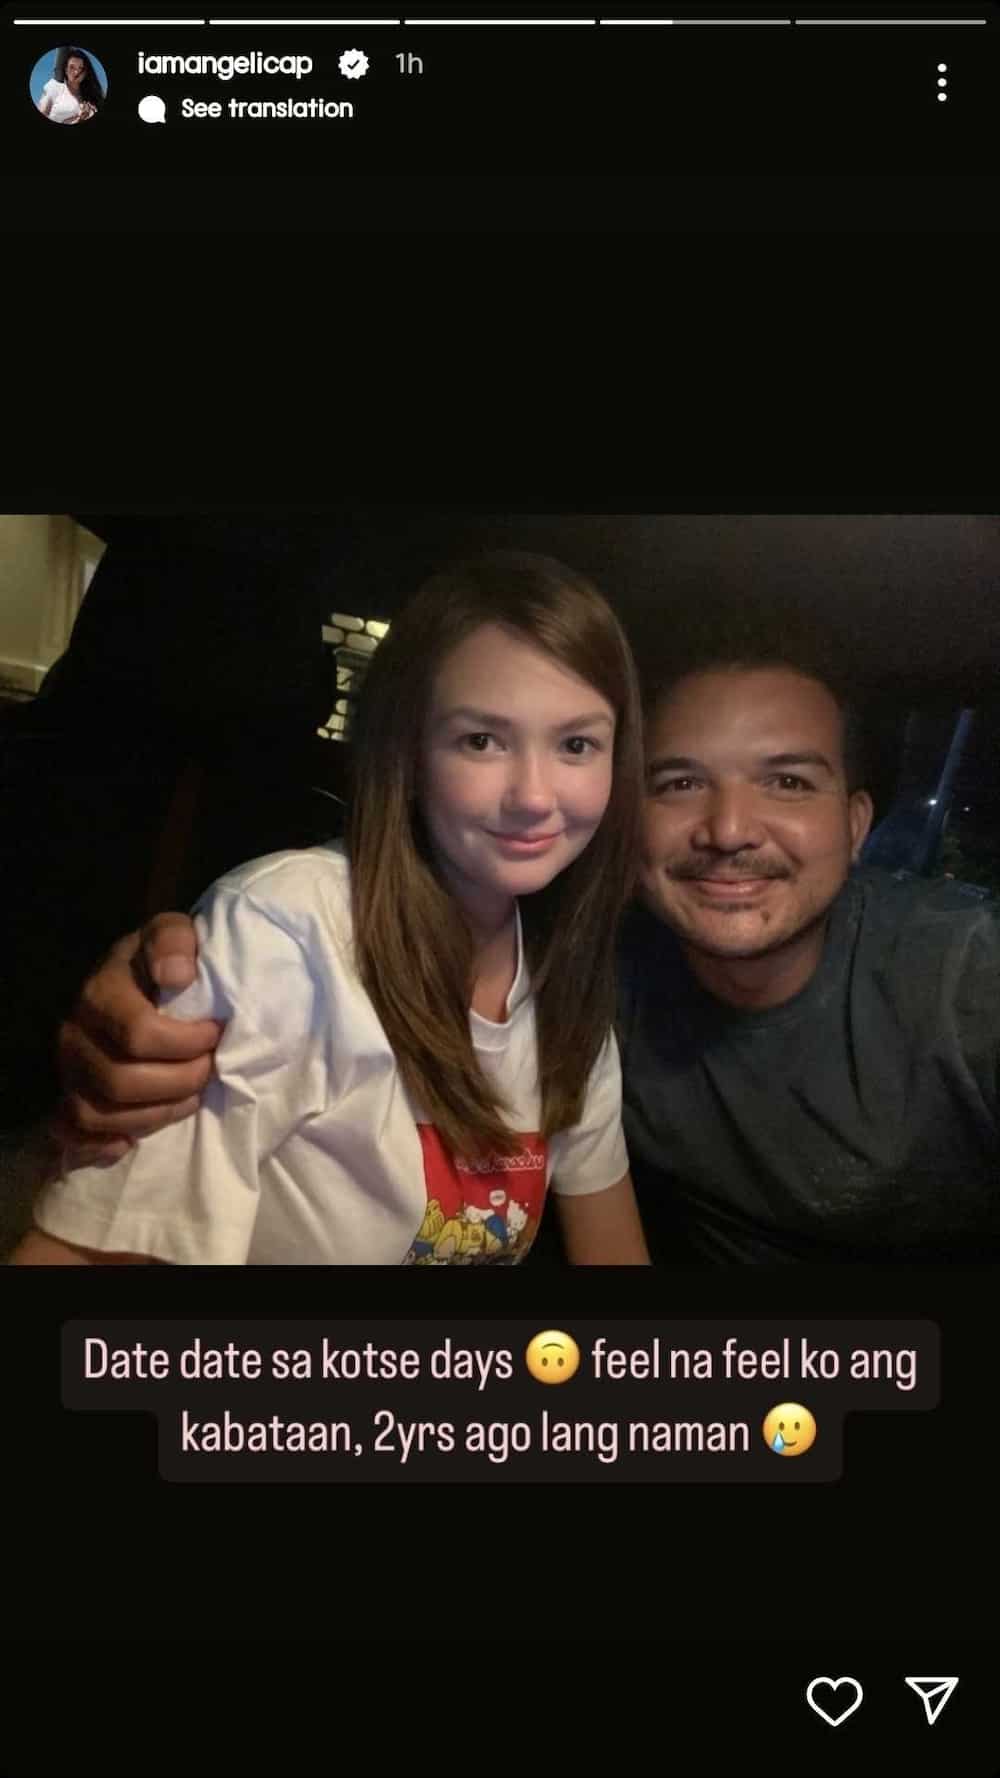 Angelica Panganiban posts throwback picture with Gregg Homan: "Date date sa kotse days"